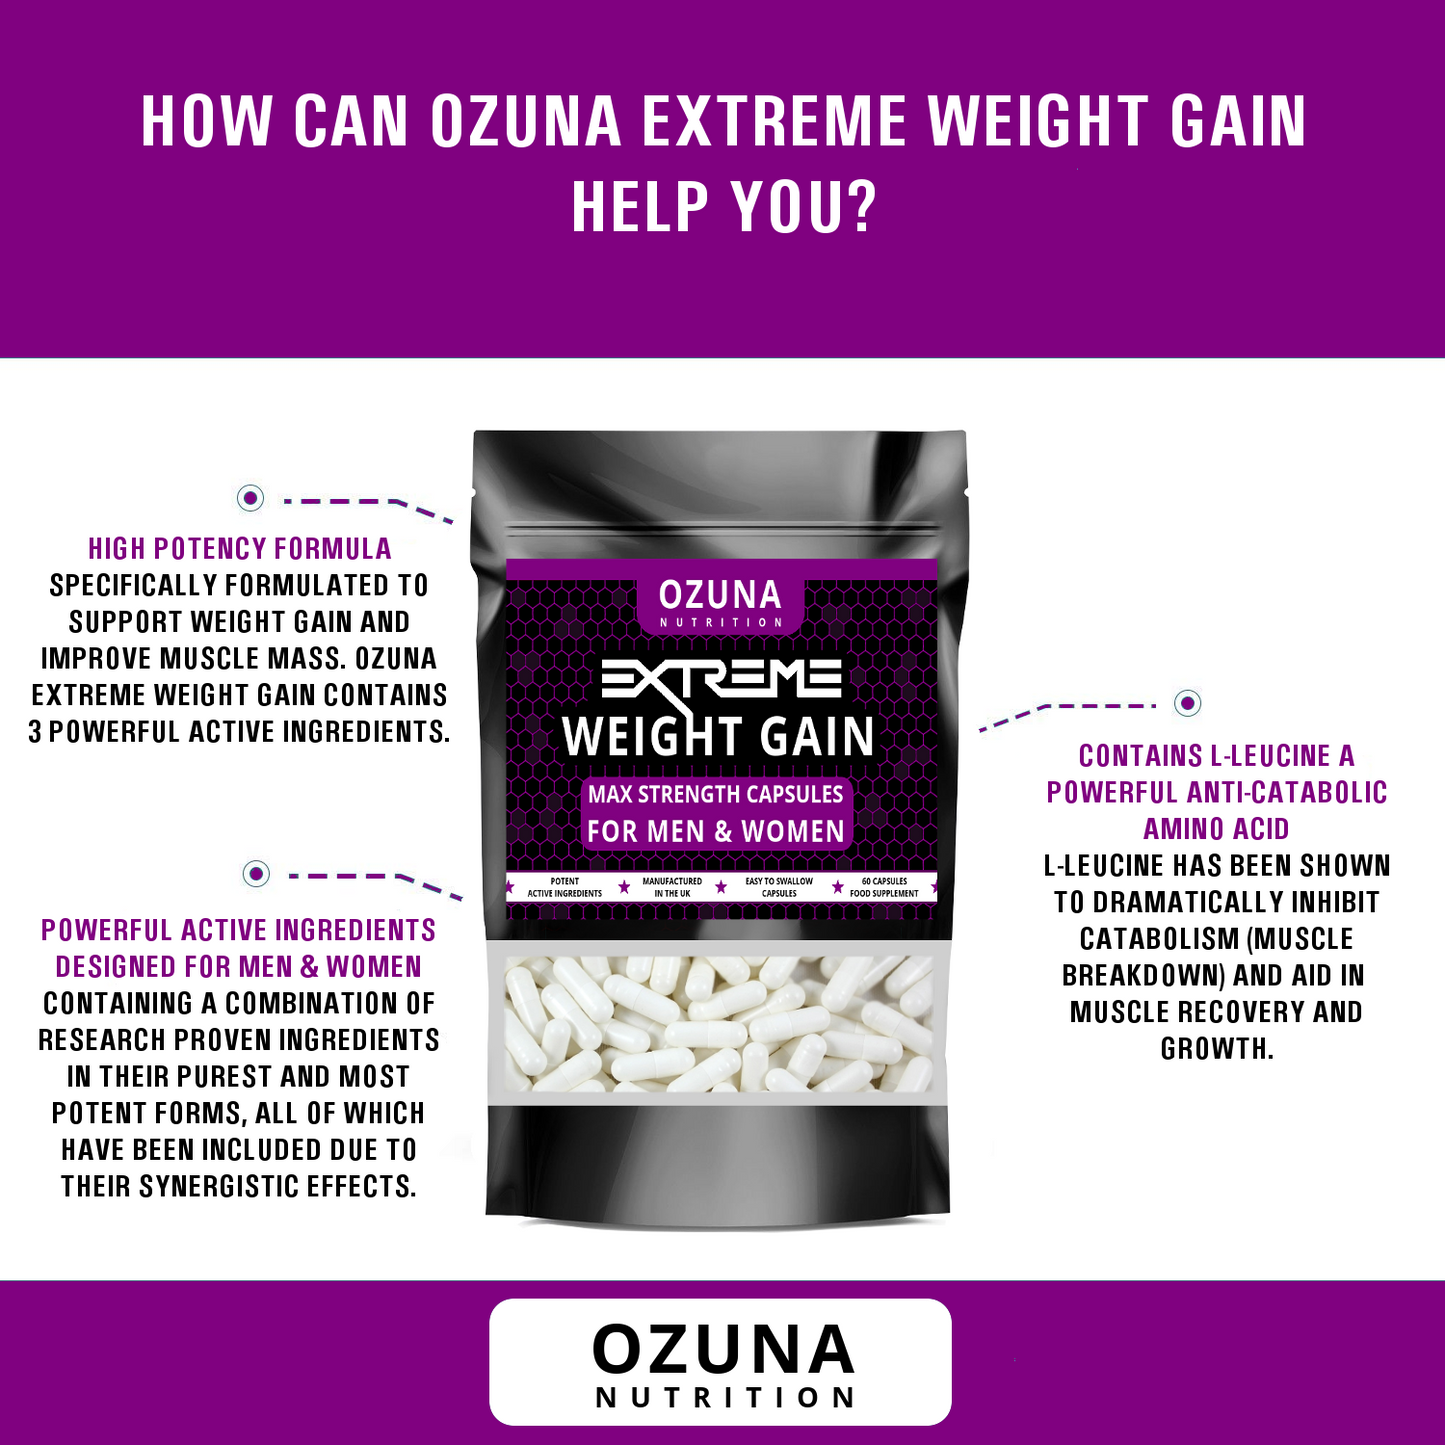 Extreme Weight Gain Capsules